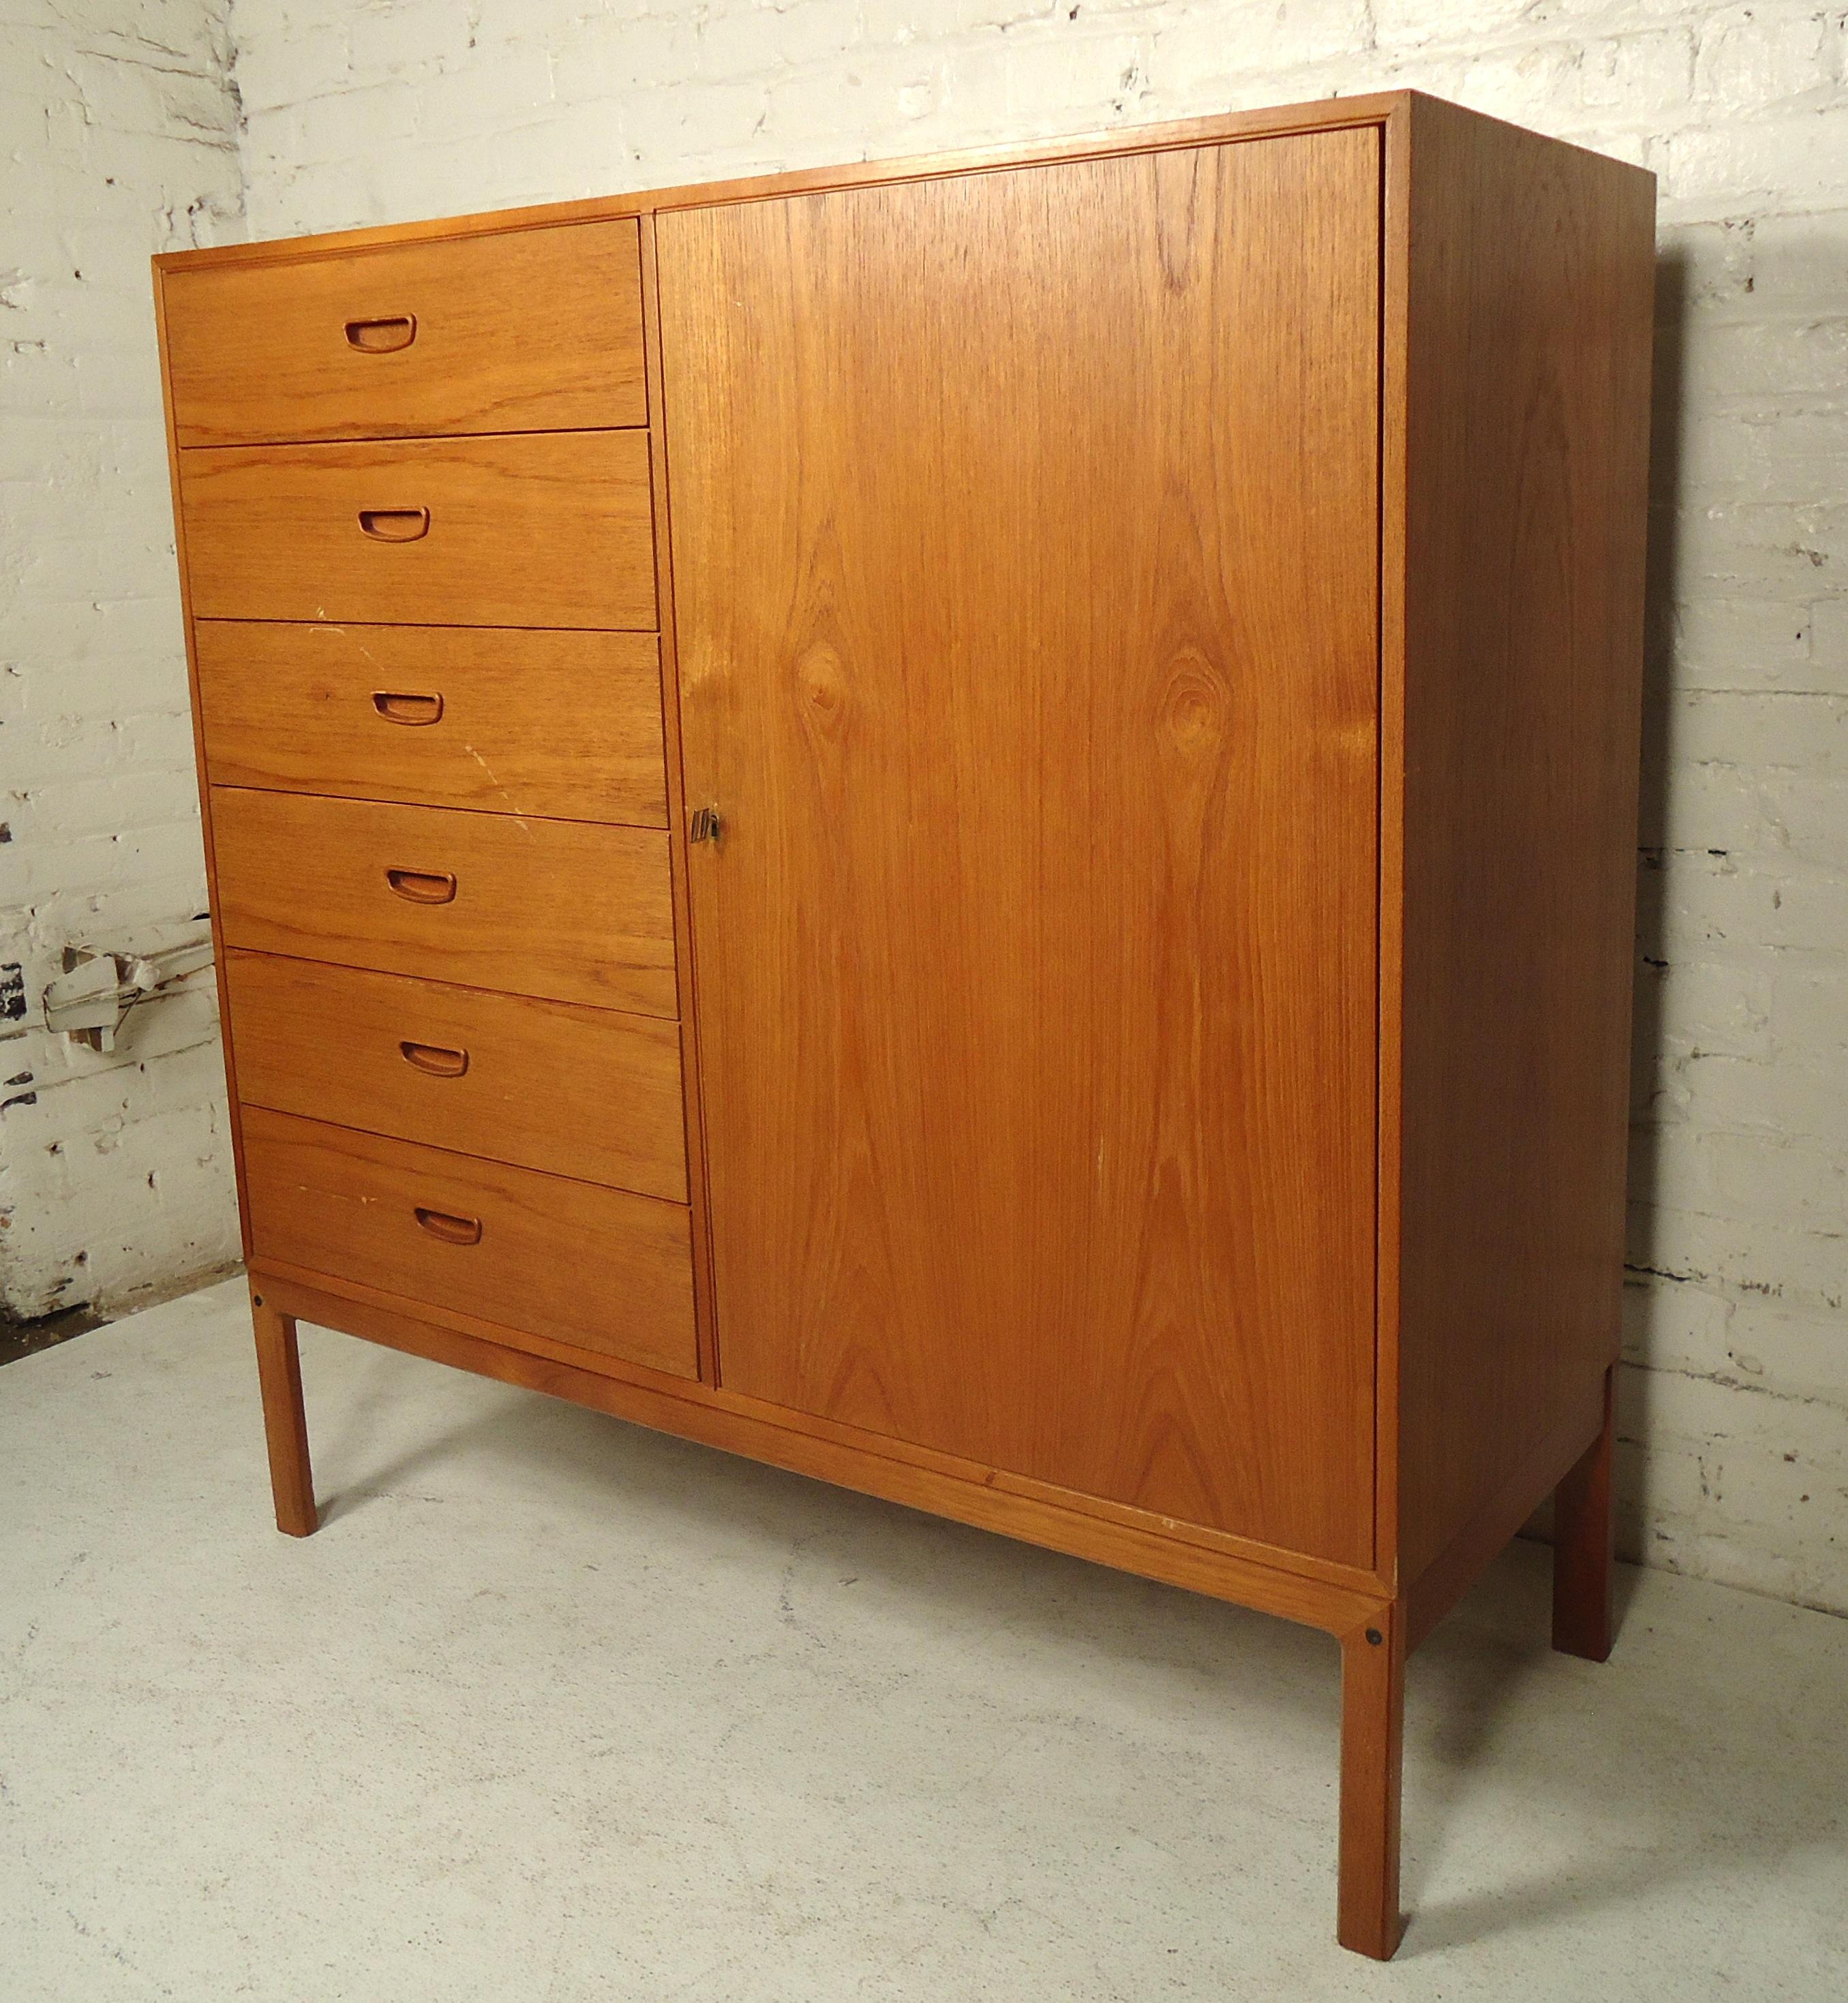 Sleek vintage modern Danish dresser in rich teak wood grain features six drawers with sculpted pulls and six inner pullout / pull-out shelves.
Please confirm item location (NY or NJ).